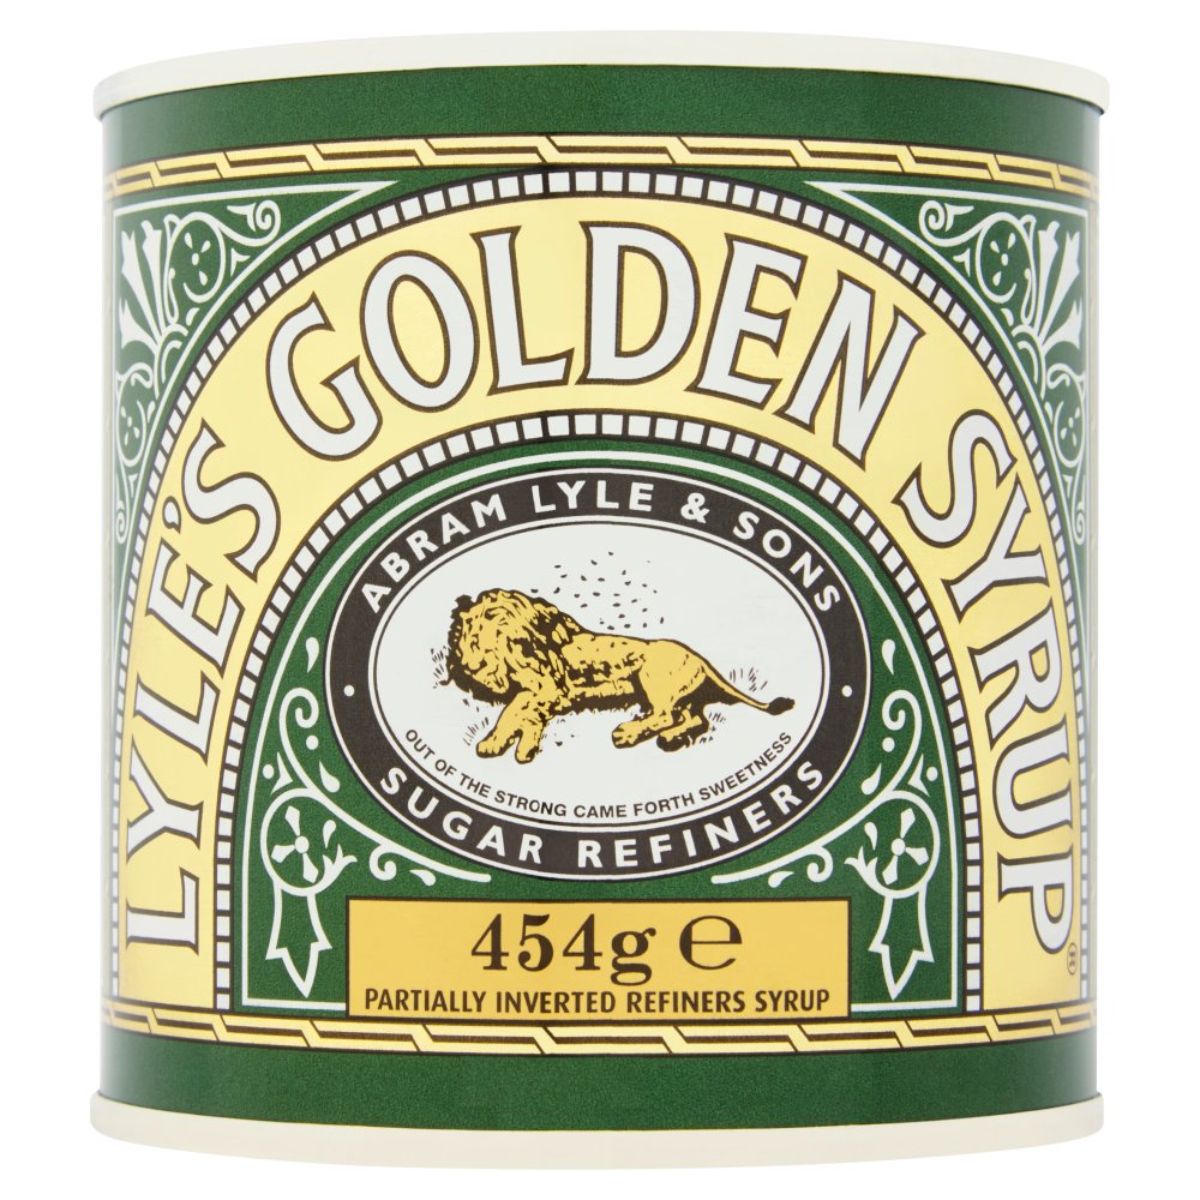 A tin of Lyle's - Golden Syrup - 454g featuring vintage-style green and gold packaging with a lion logo.